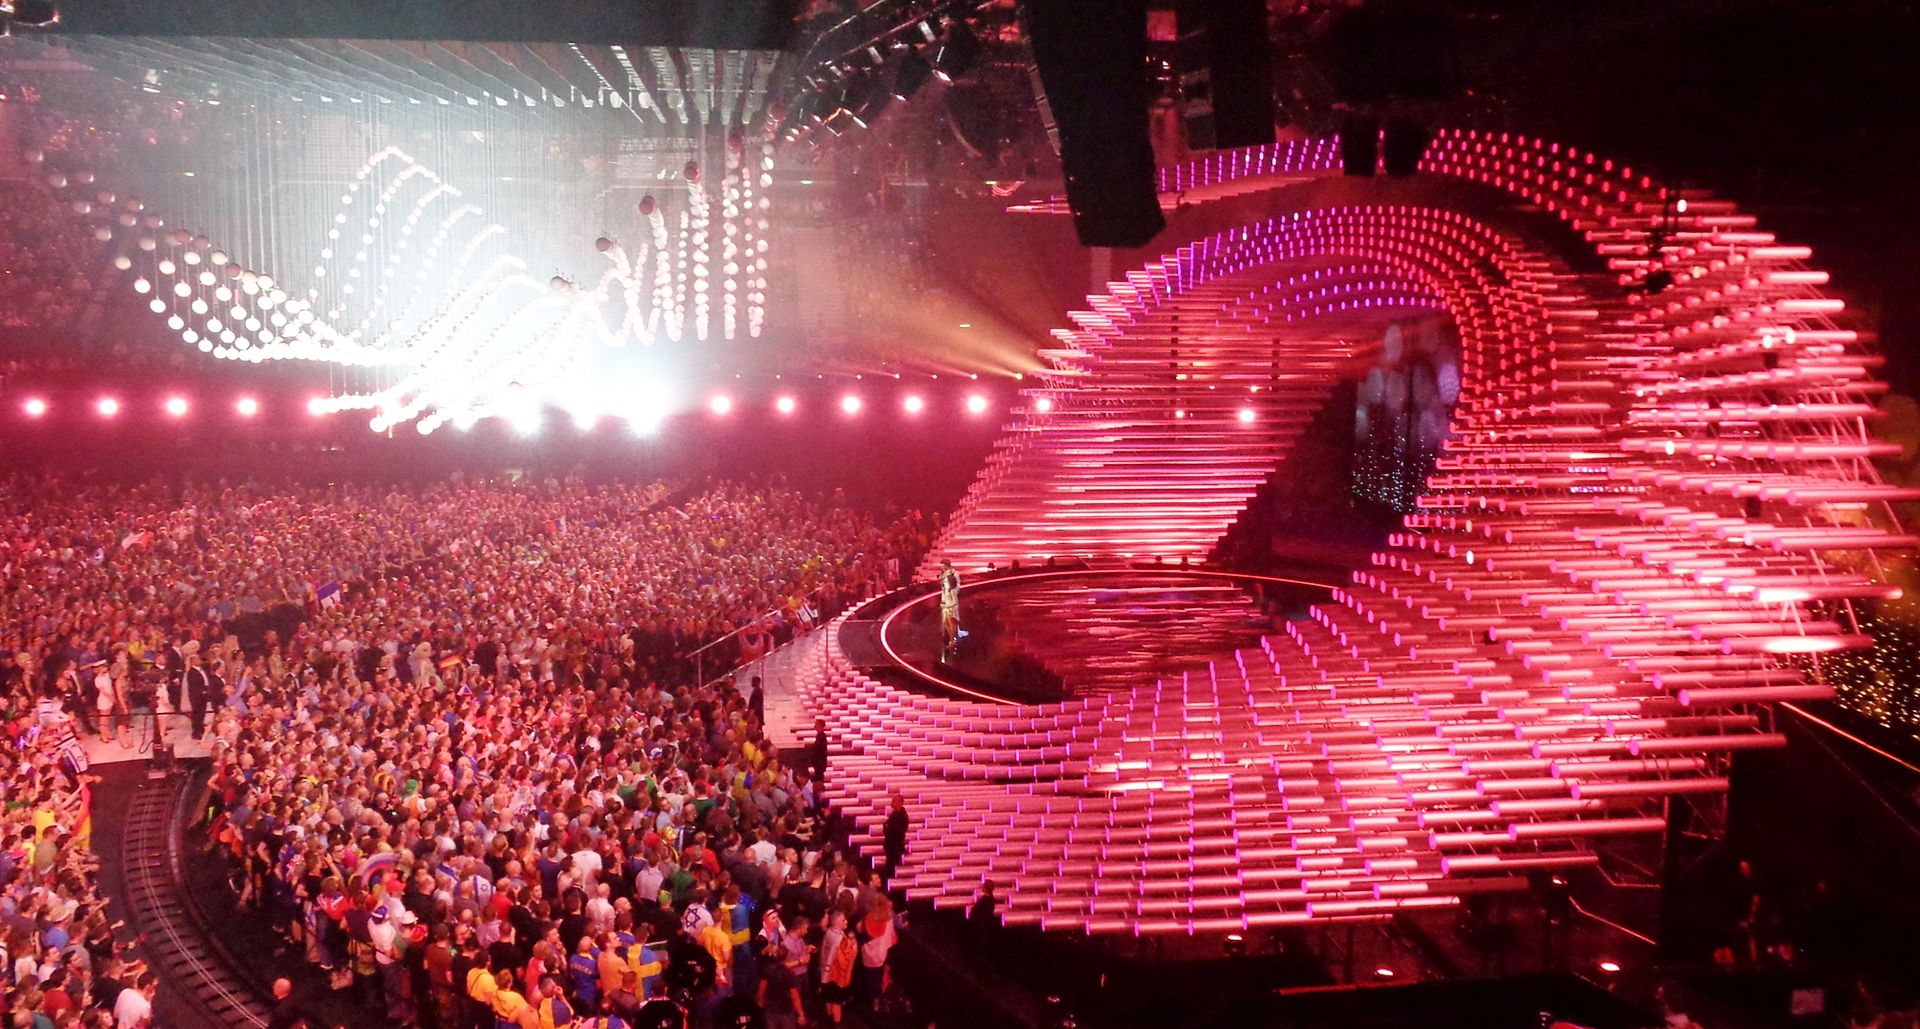 Eurovision Webcast Hacked With Fake Tel Aviv Missile Attack Silicon Uk Tech News - eurovision in concert 2019 roblox eurovision song contest